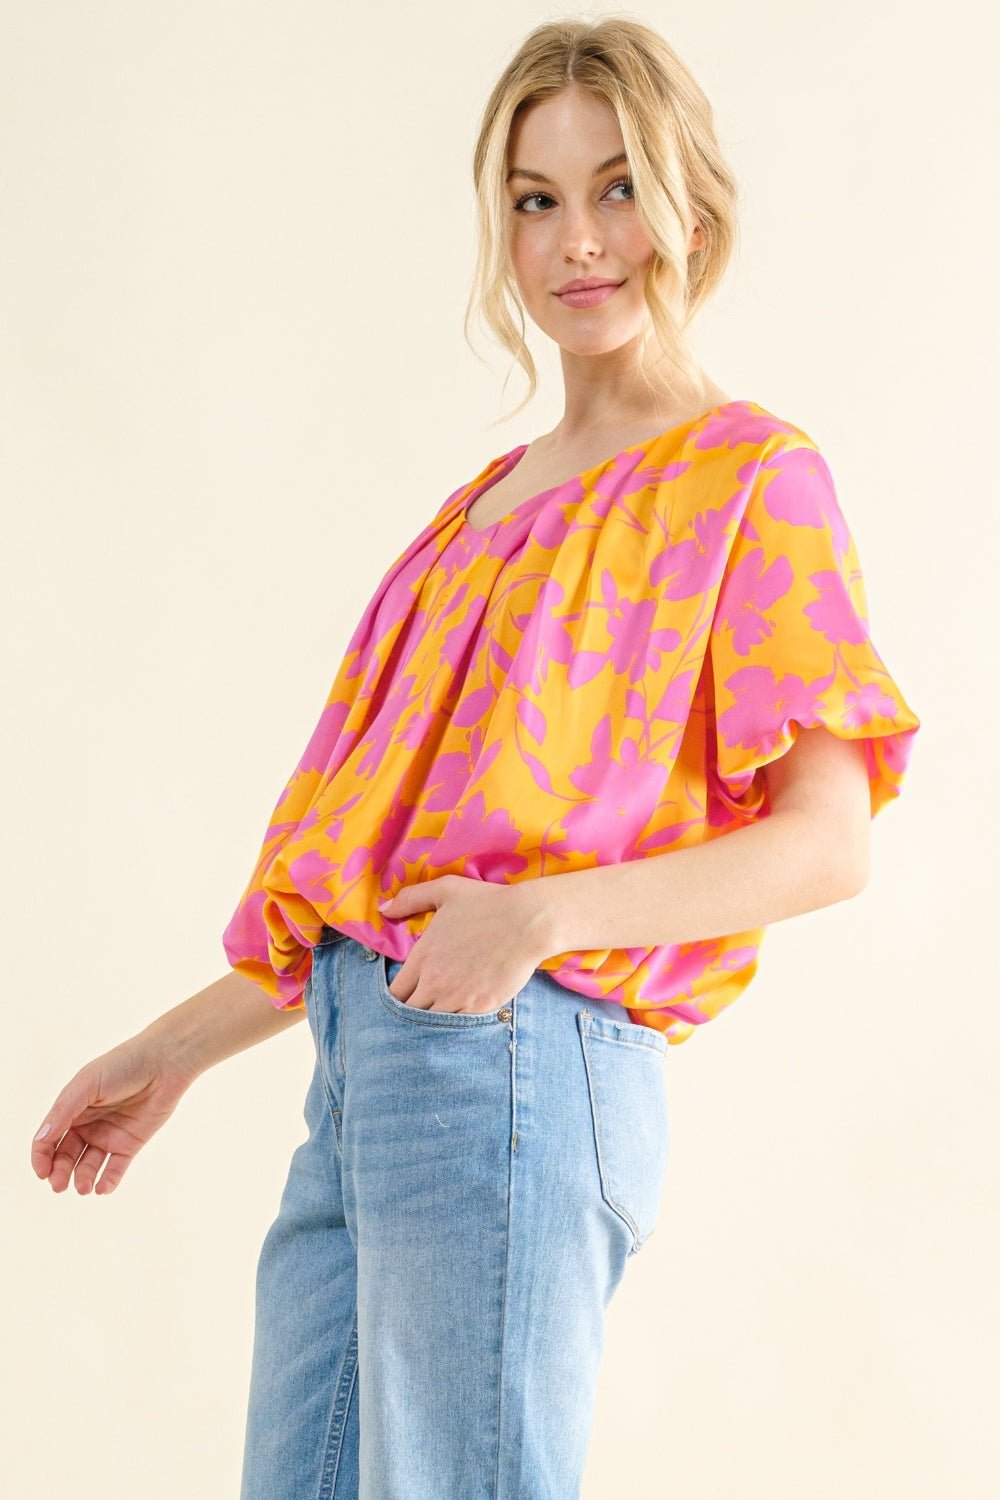 Printed Satin Bubble Hem Top in CitrusTopAnd the Why